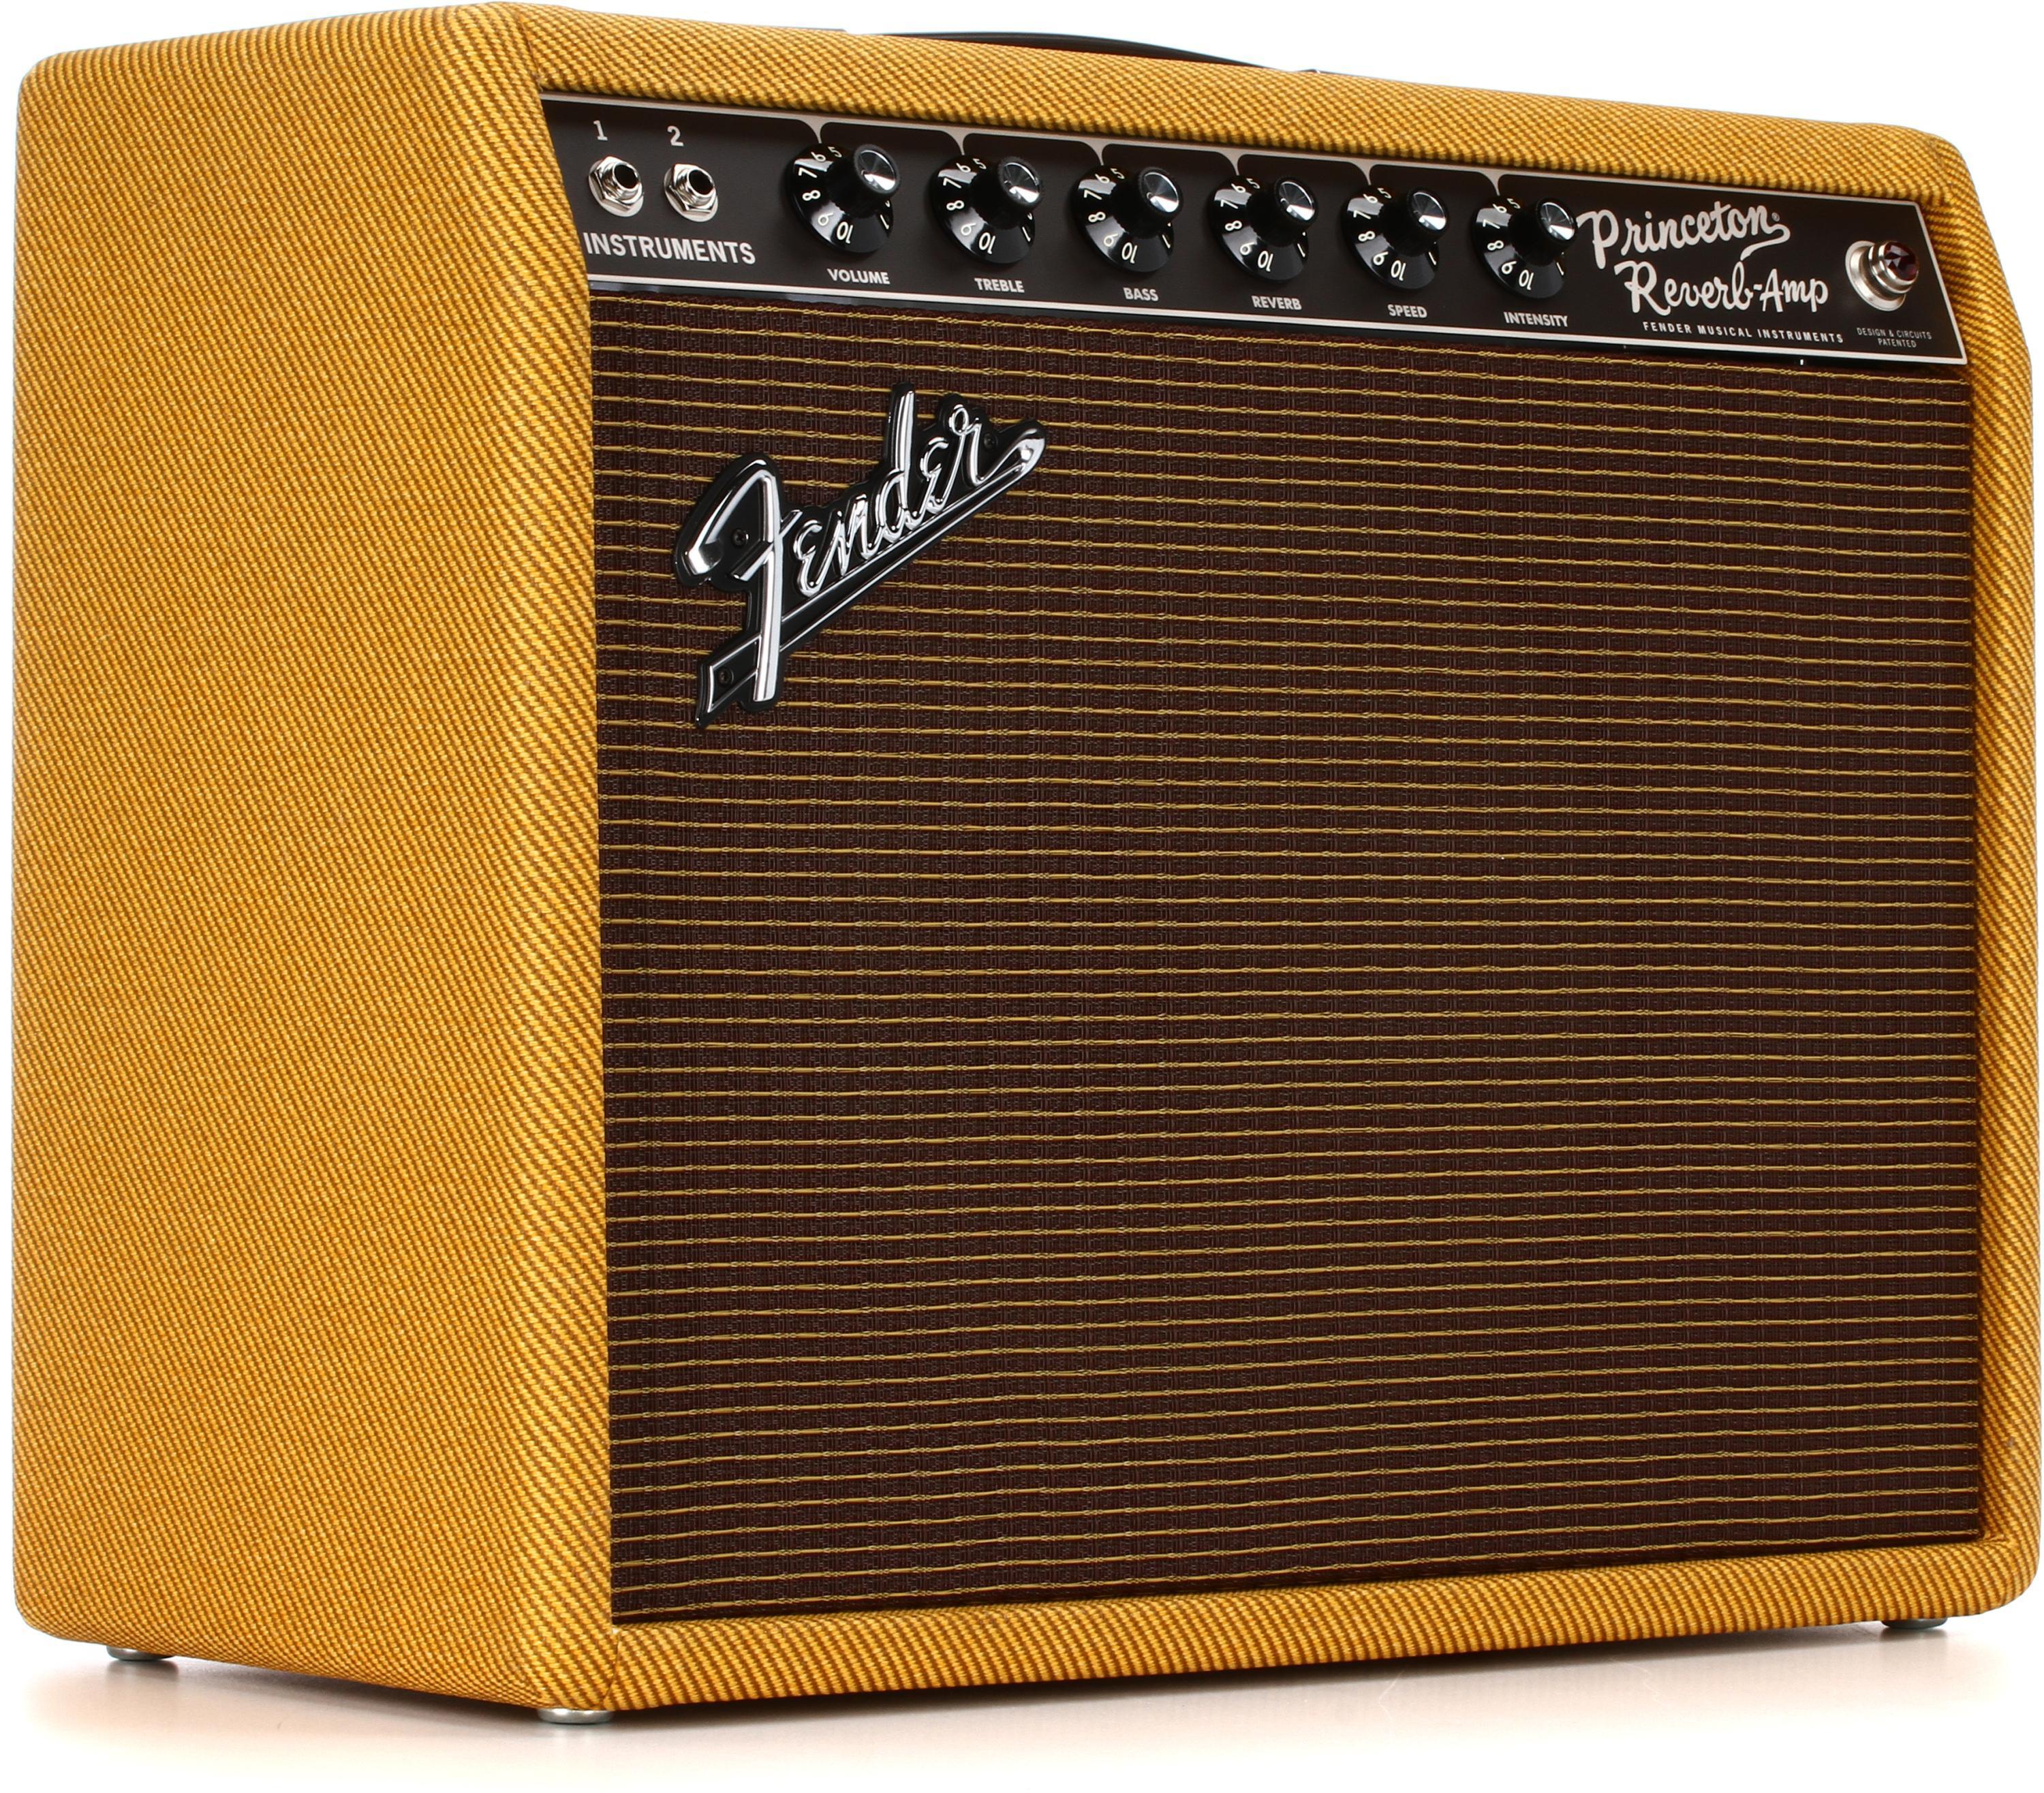 Fender '65 Princeton Reverb x 12-inch 12-watt Tube Combo Amp Lacquered  Tweed, Sweetwater Exclusive Reviews